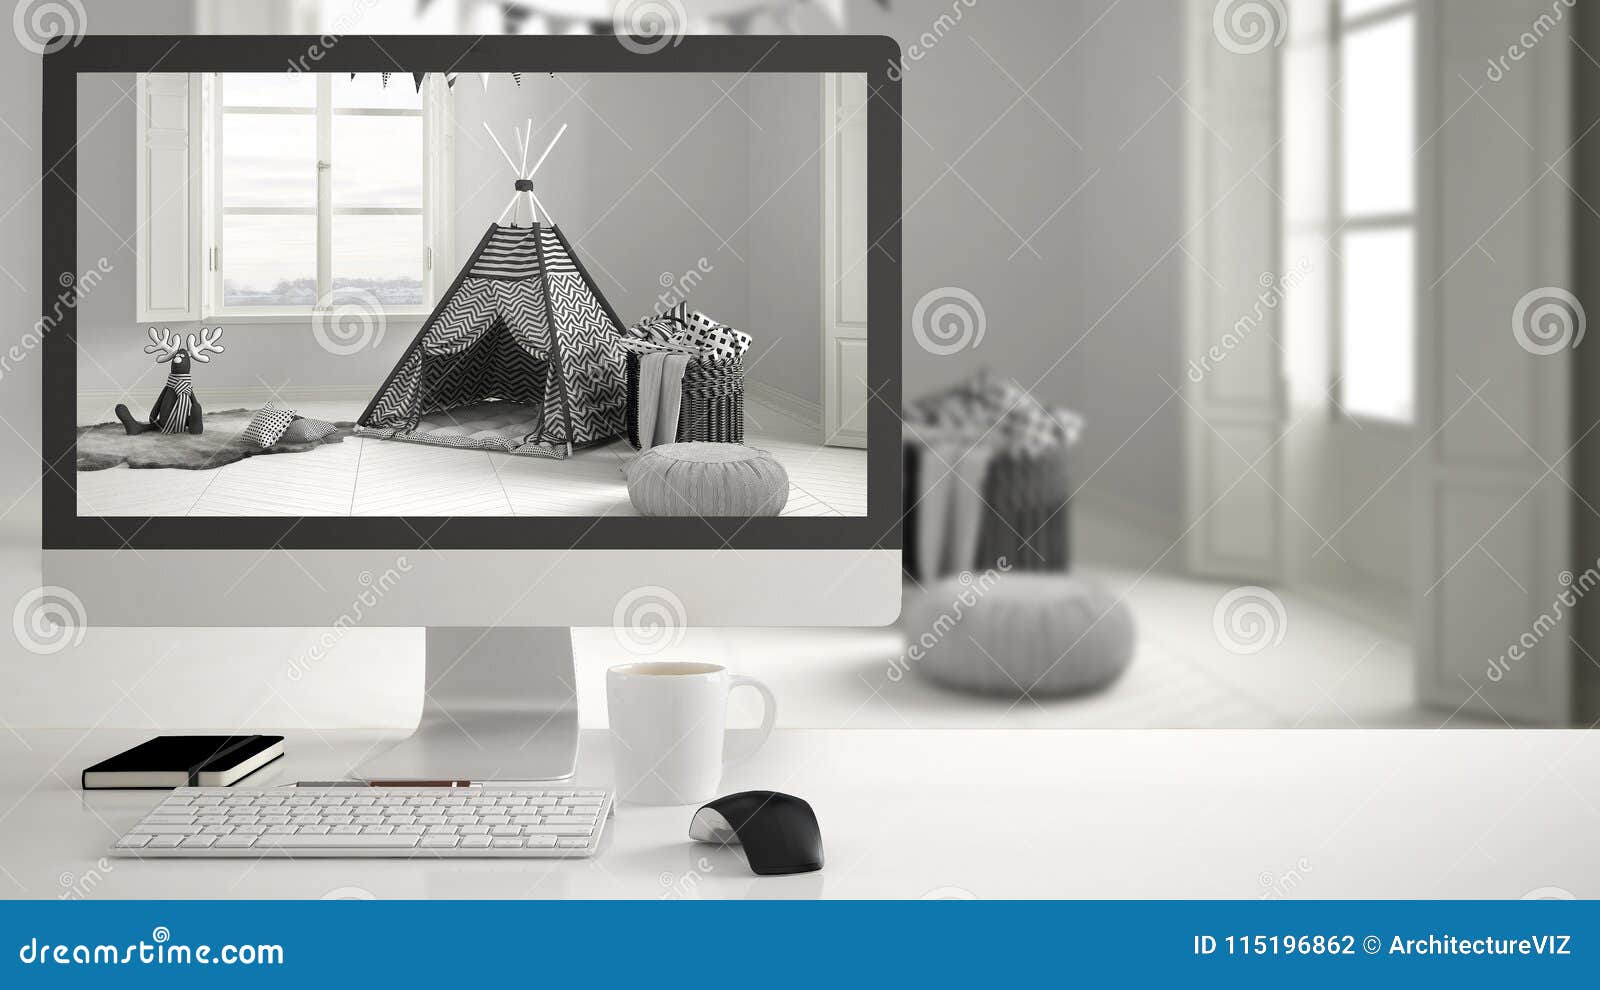 Architect House Project Concept Desktop Computer On White Work